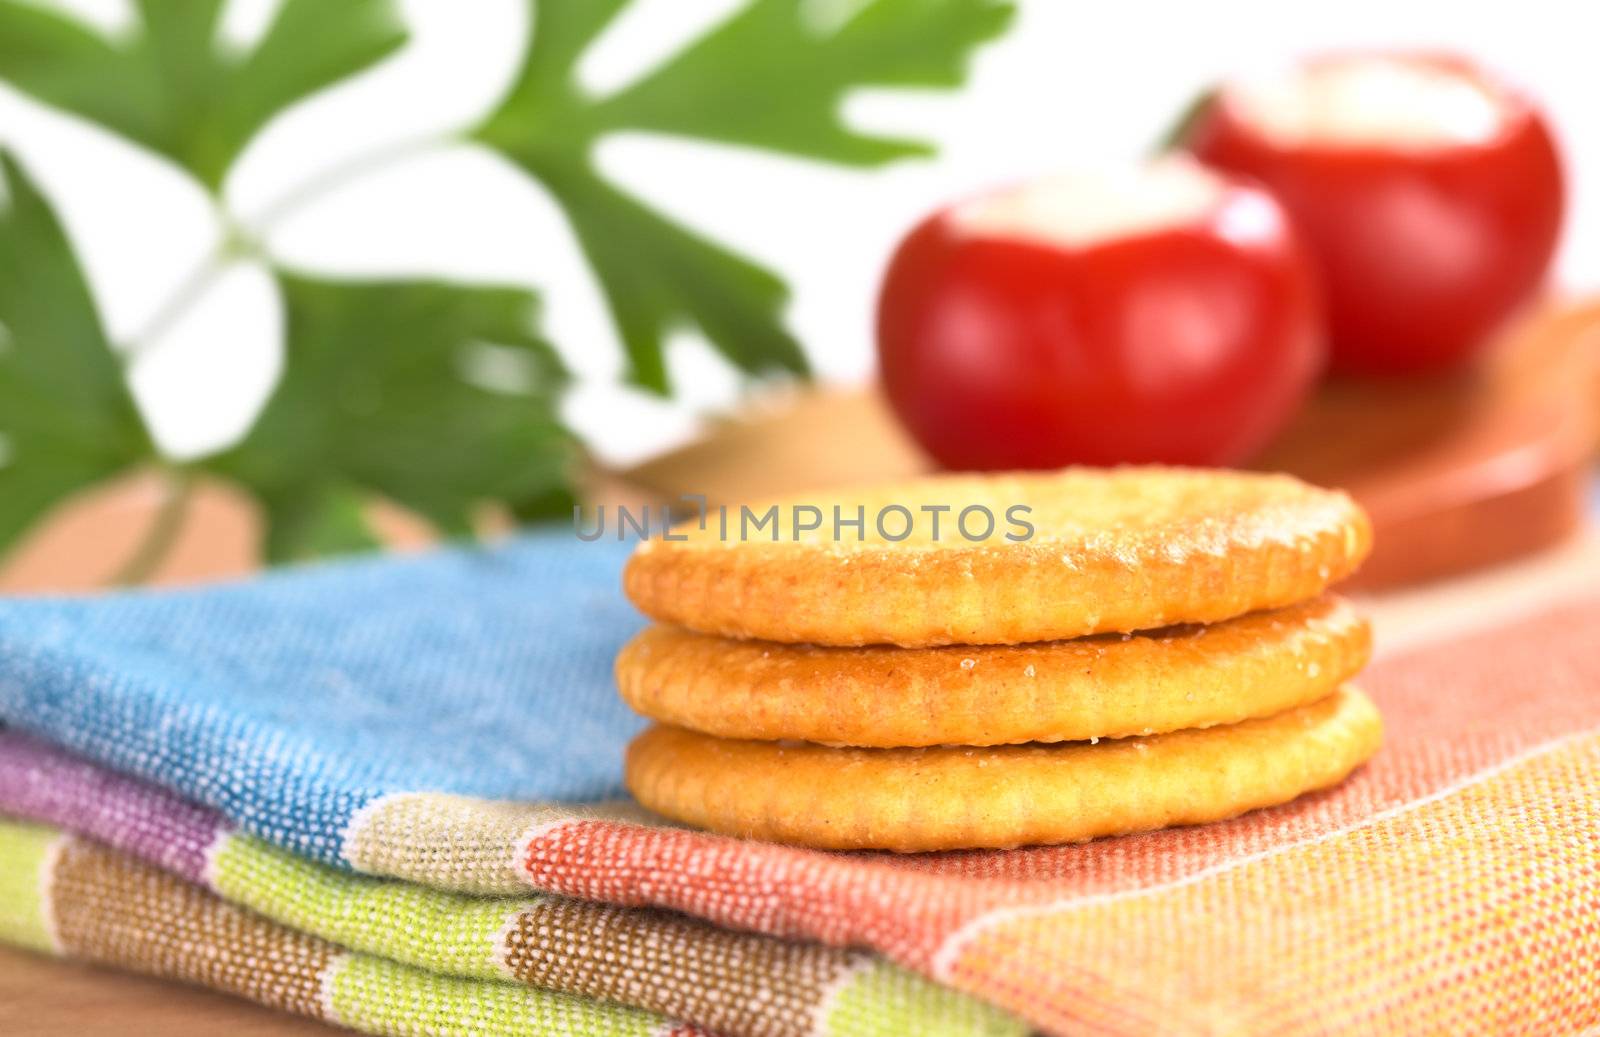 A pile of salty crackers on textile with round red pepper and parsley leaf in the back (Very Shallow Depth of Field, Focus on the front of the crackers)